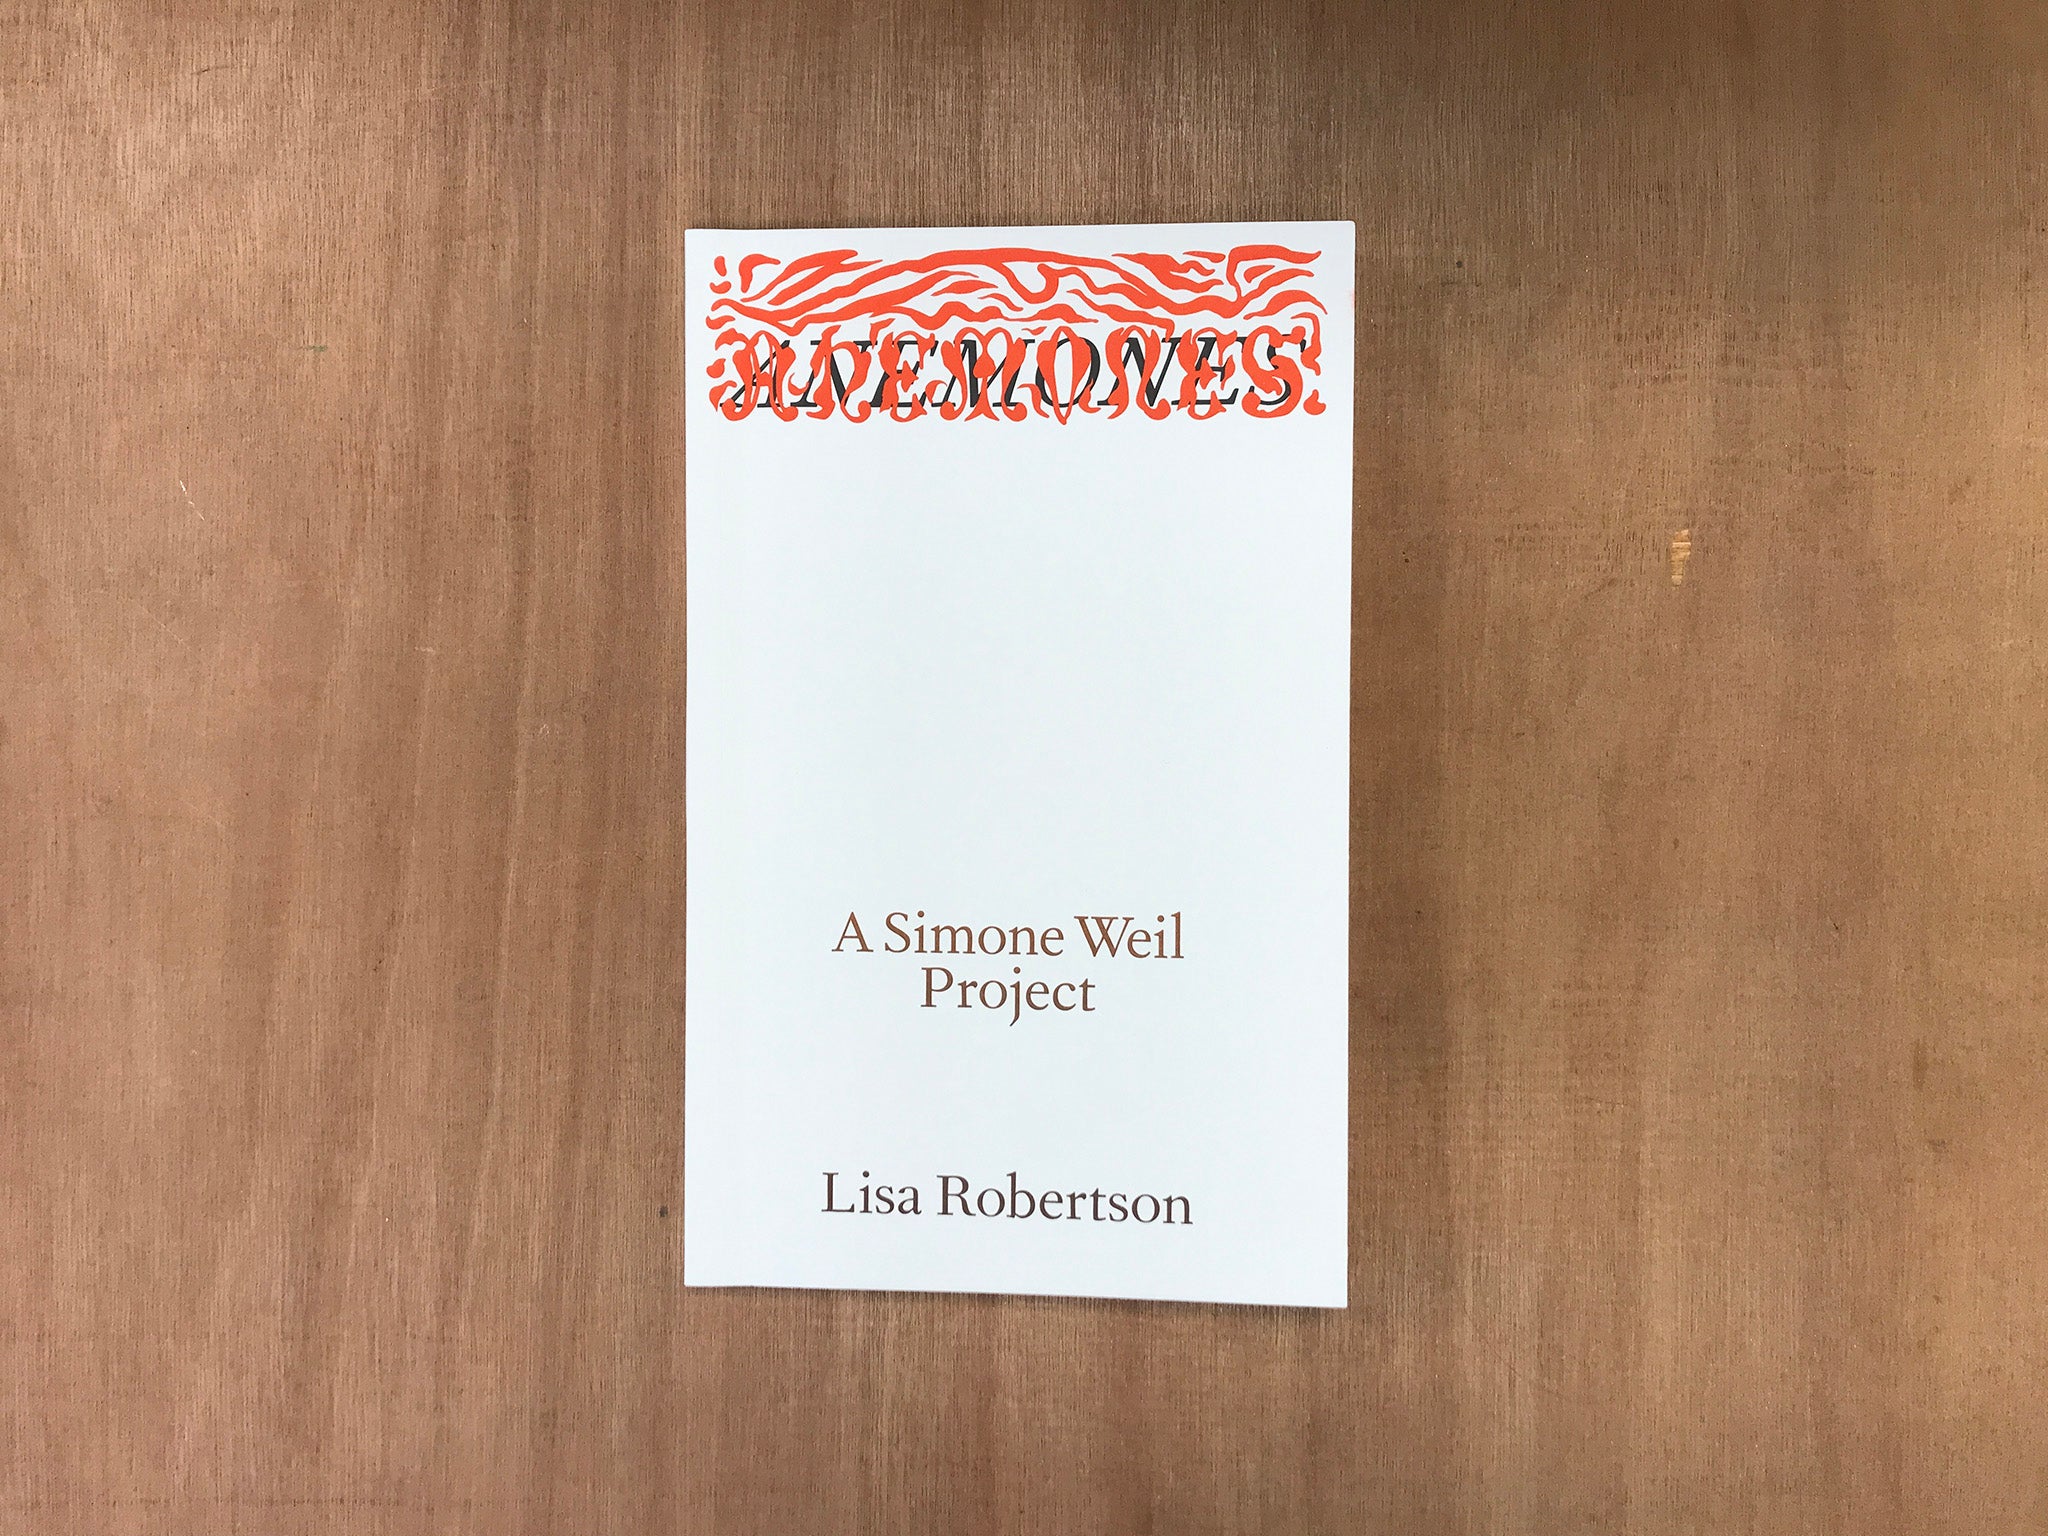 ANEMONES: A SIMONE WEIL PROJECT by Lisa Robertson